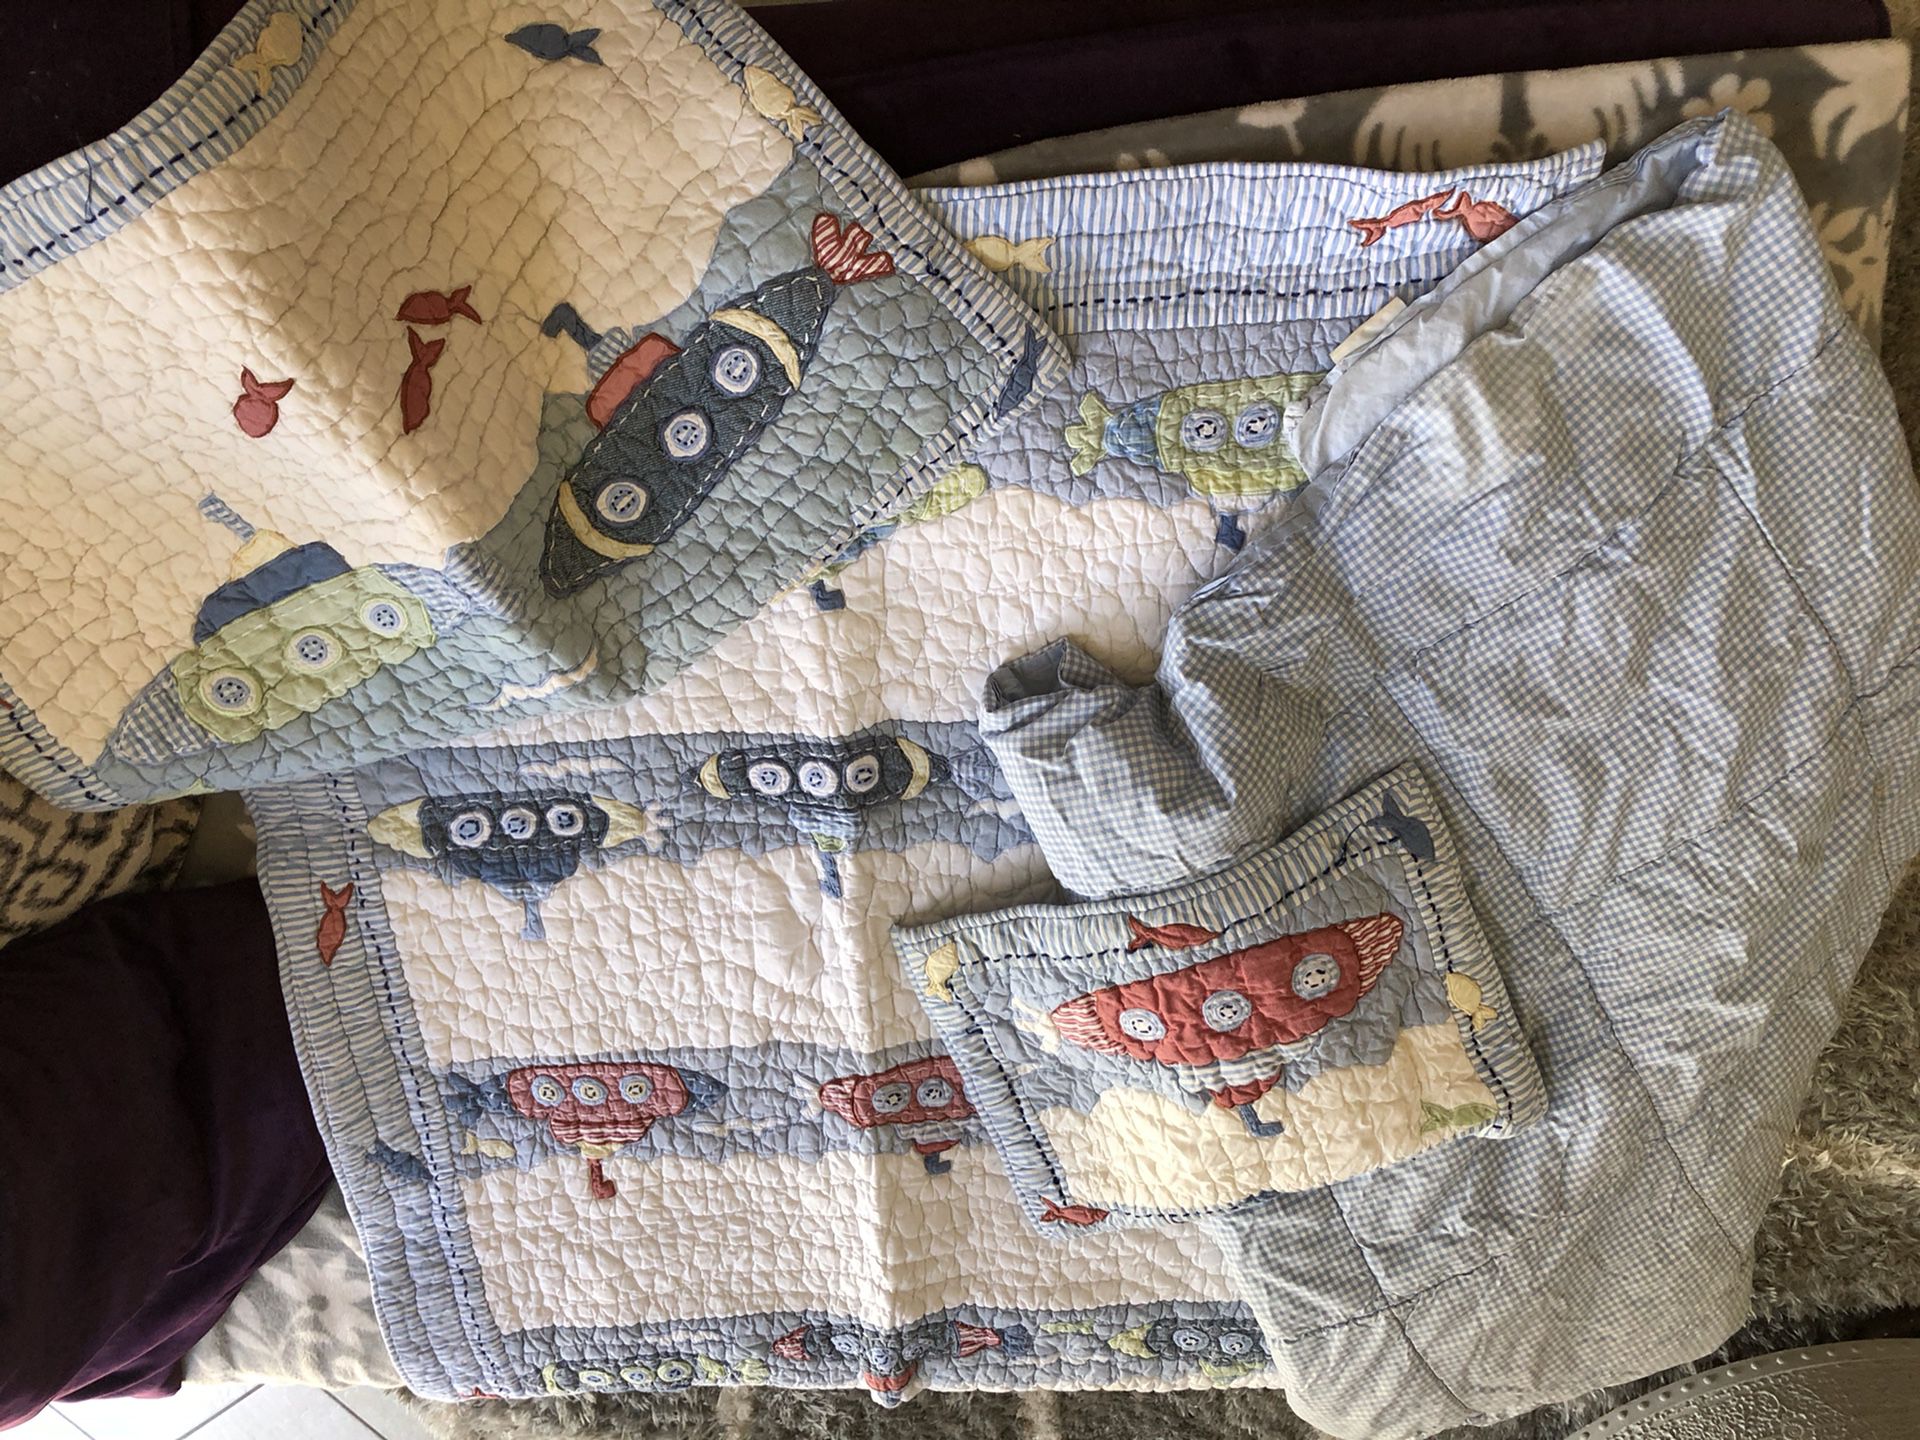 Pottery barn submarine crib set. Slight stain on gingham blanket but pillow cases and comforter are in good shape.